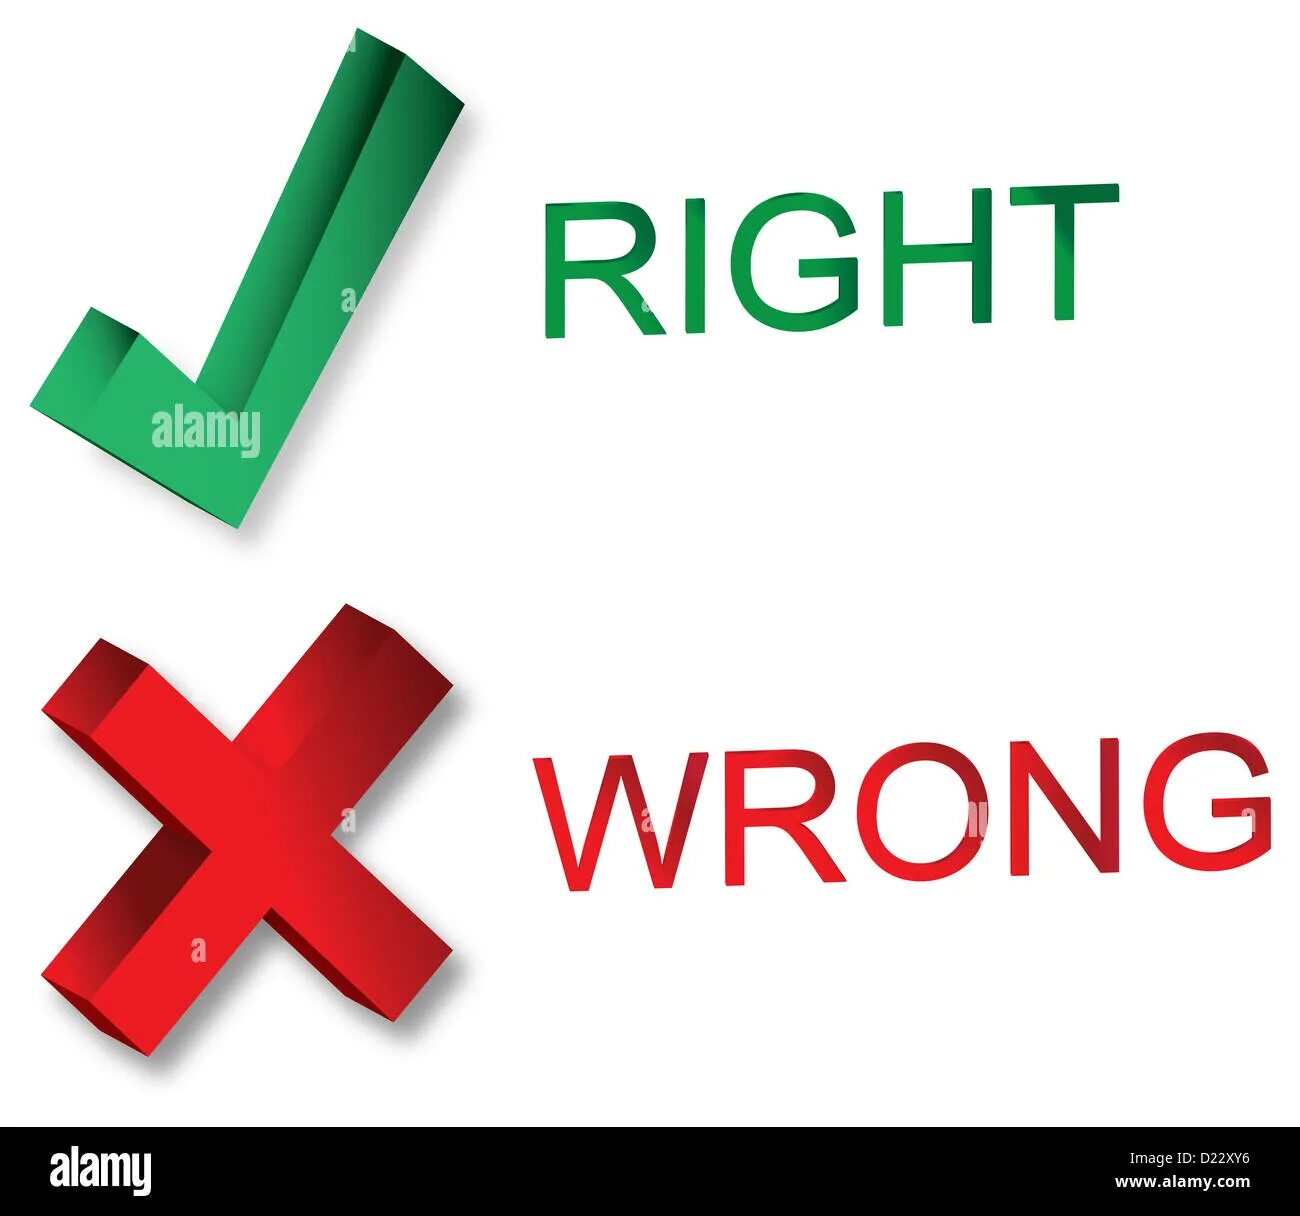 Right wrong. Картинка right wrong. Значок неверно. Надпись wrong. Слова wrong